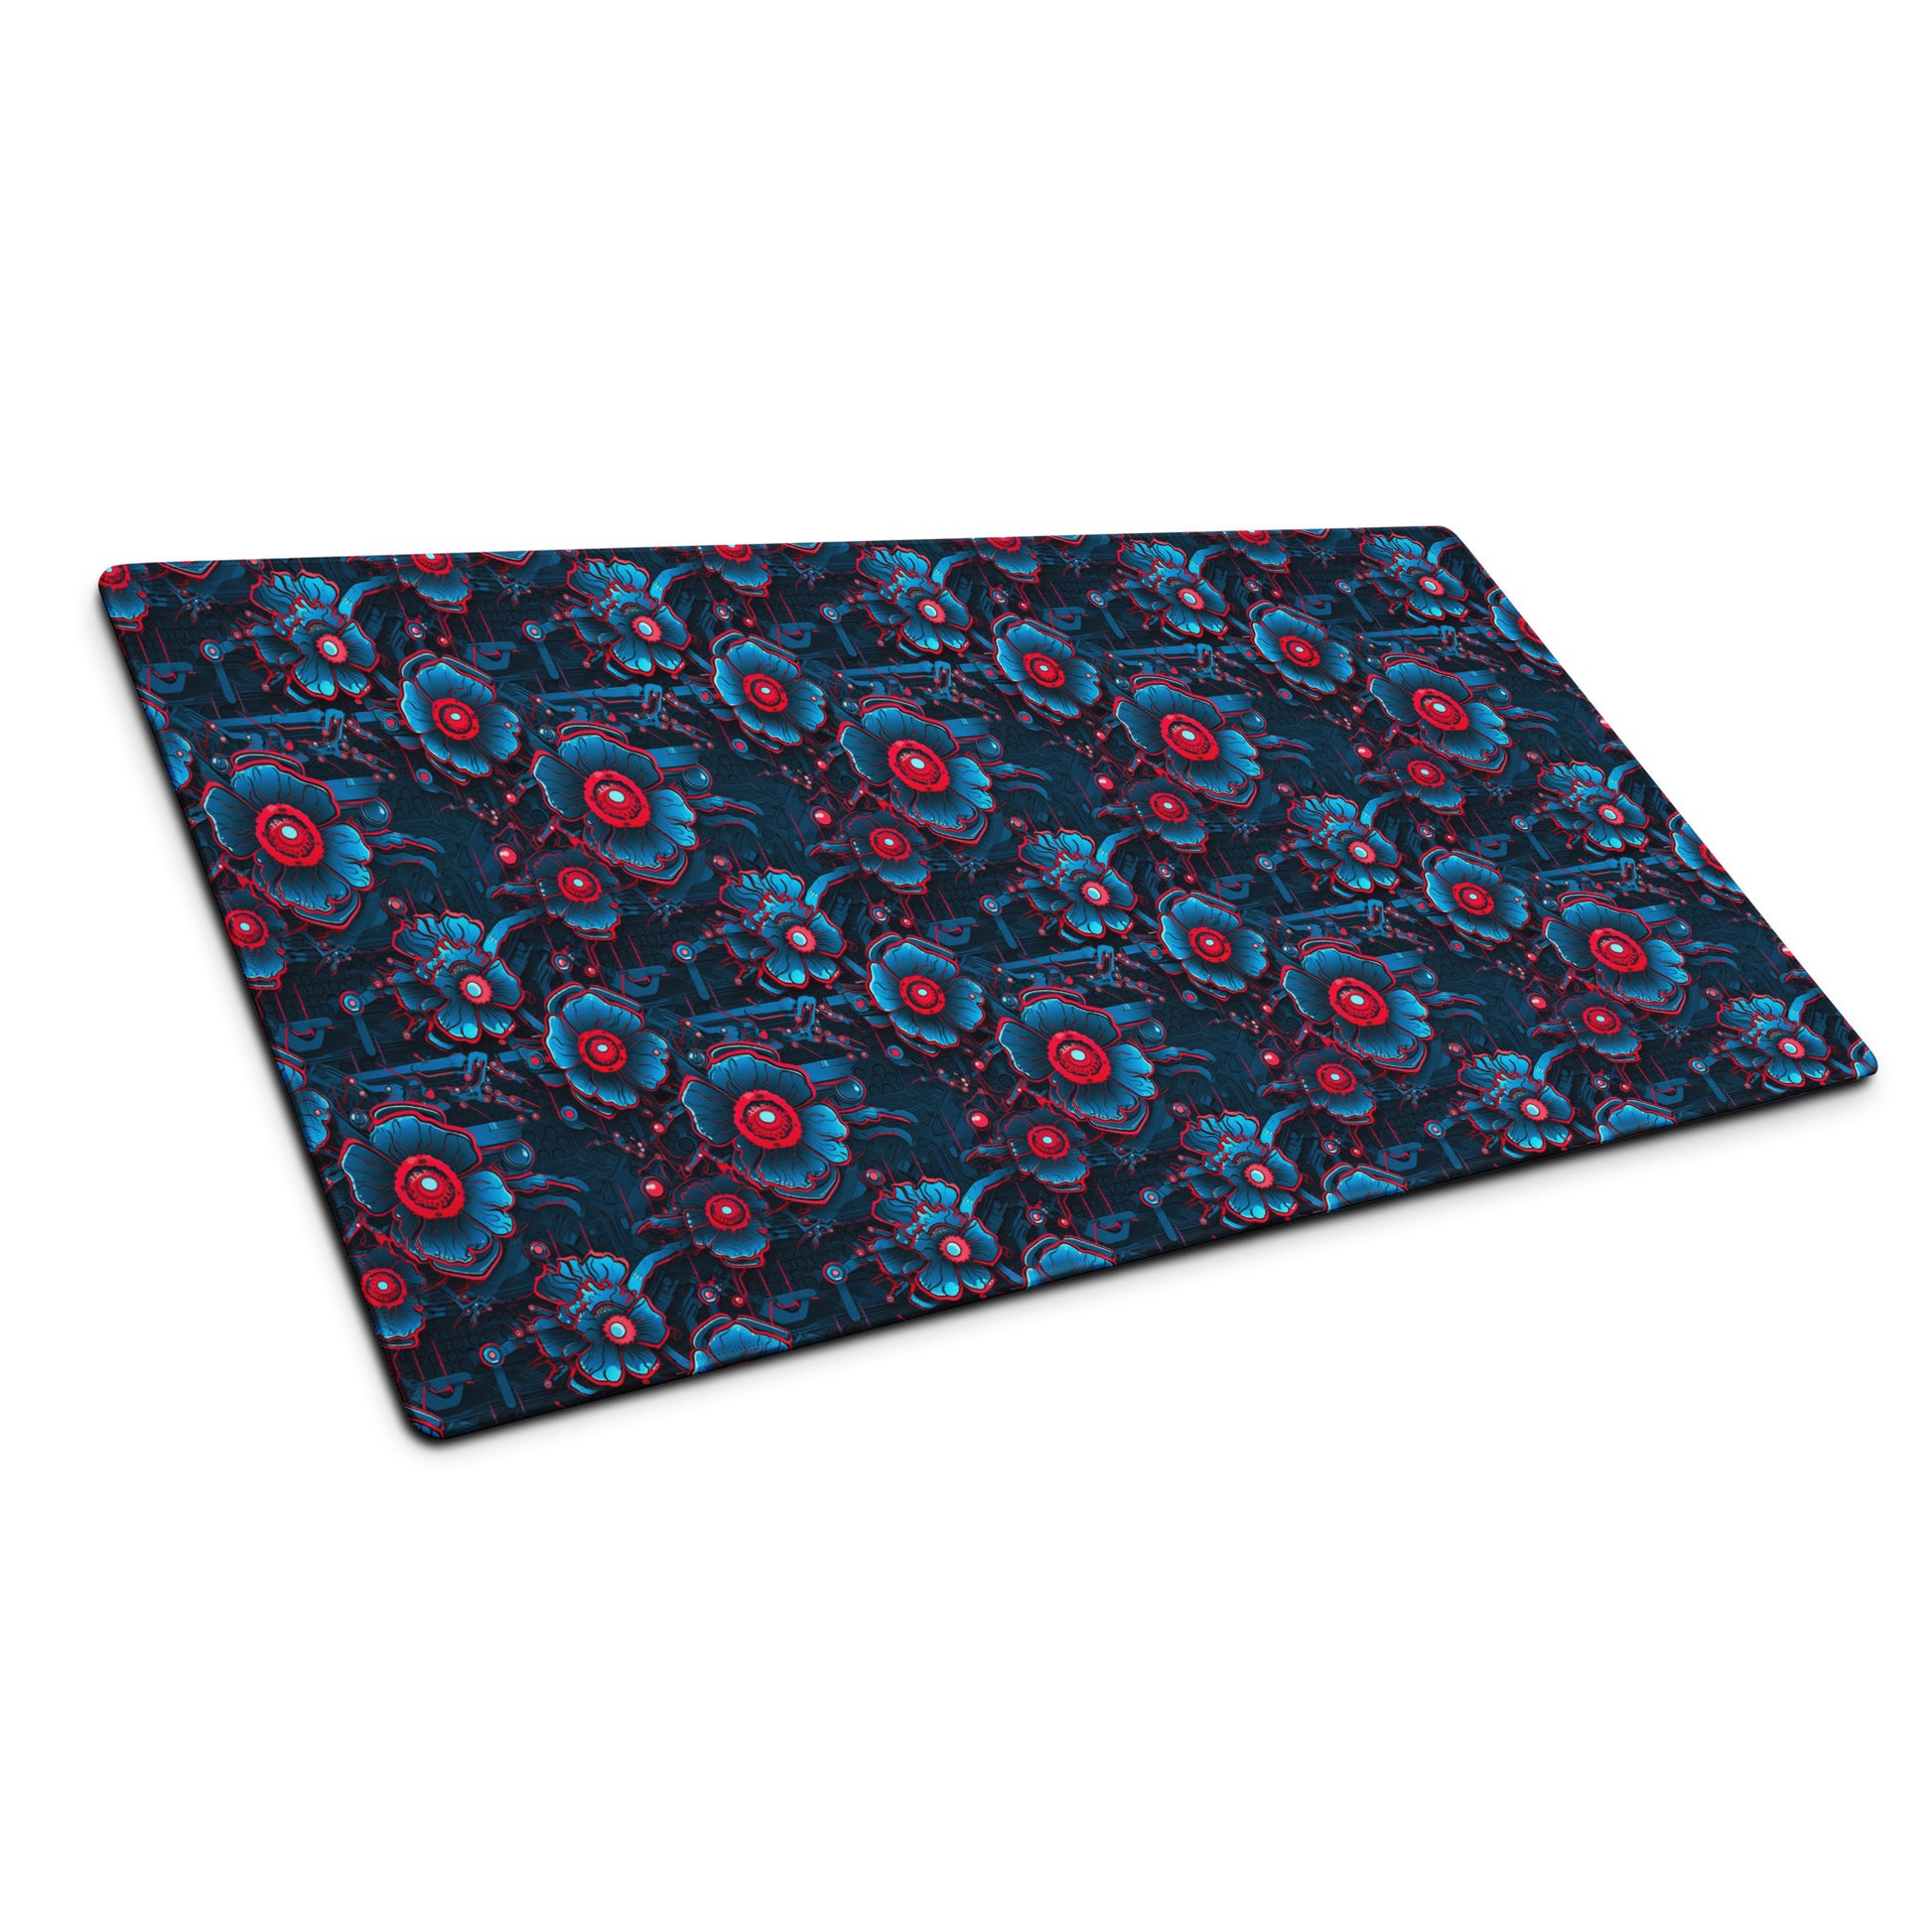 A 36" x 18" desk pad with a blue and red robotic floral pattern sitting at an angle.